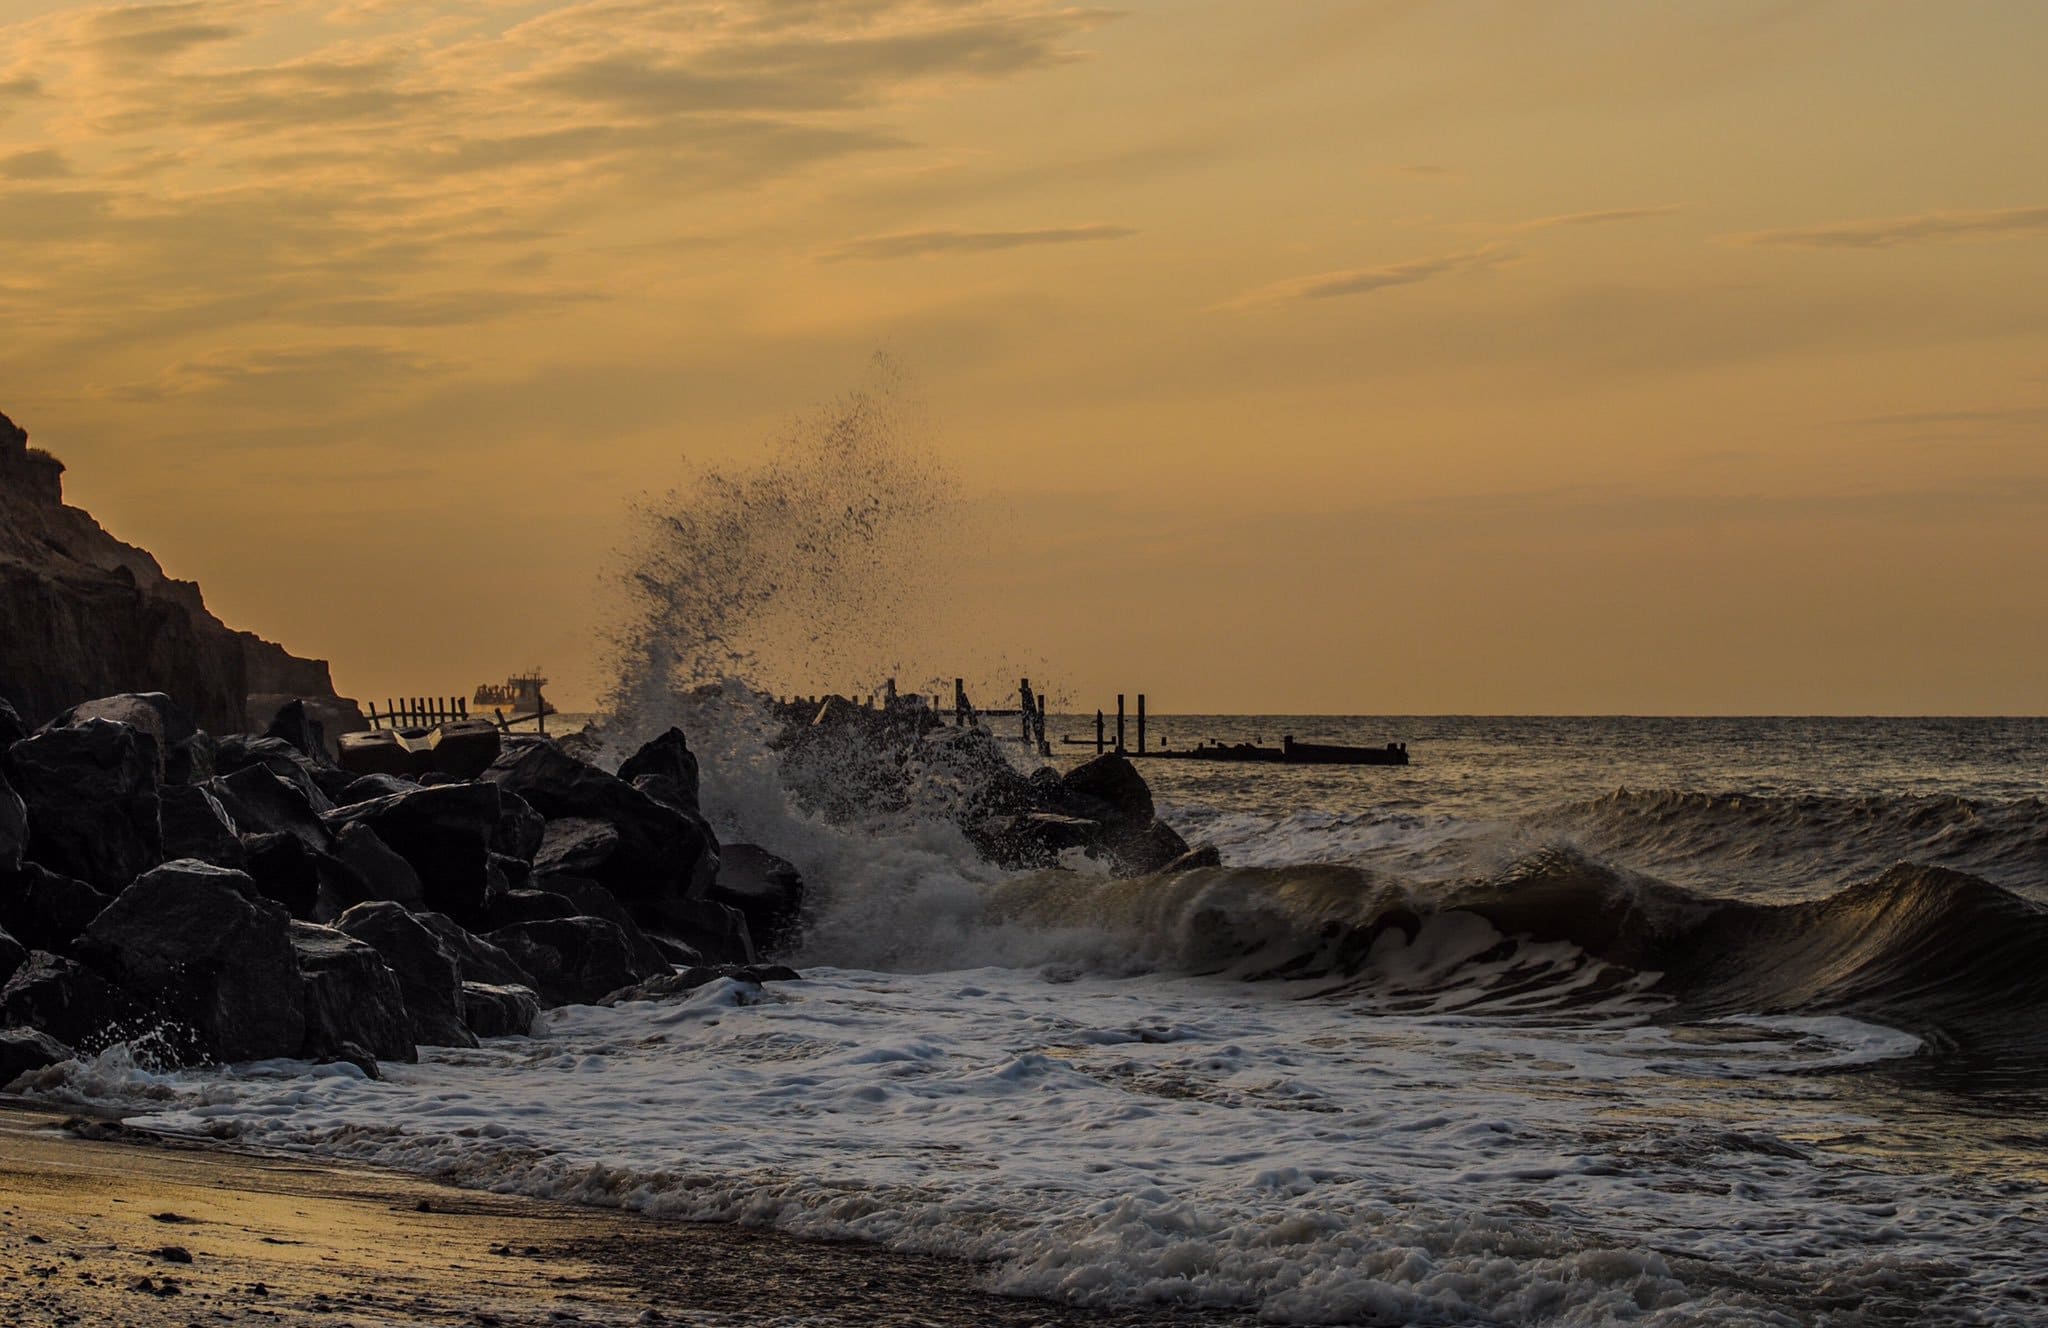 1st Place The sea and sunset in Happisburgh, Norfolk by Veronica @VeronicaJoPo